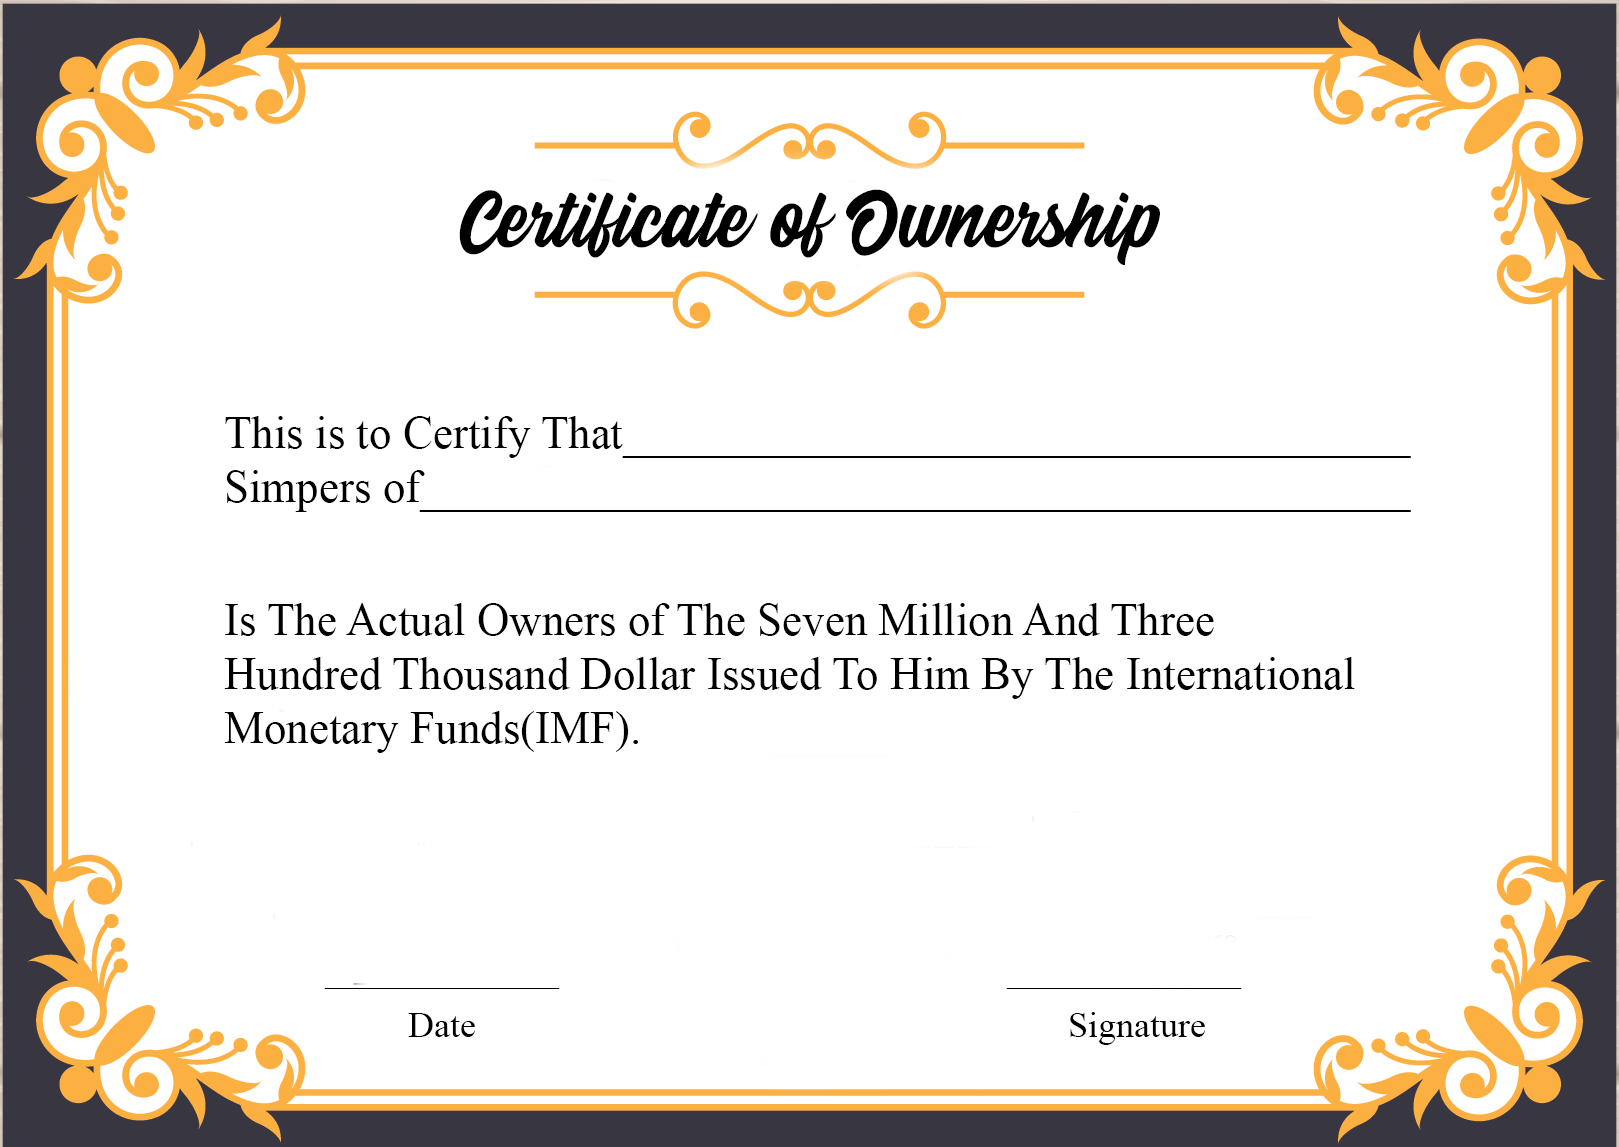 Free Sample Certificate Of Ownership Templates | Certificate Pertaining To Ownership Certificate Template